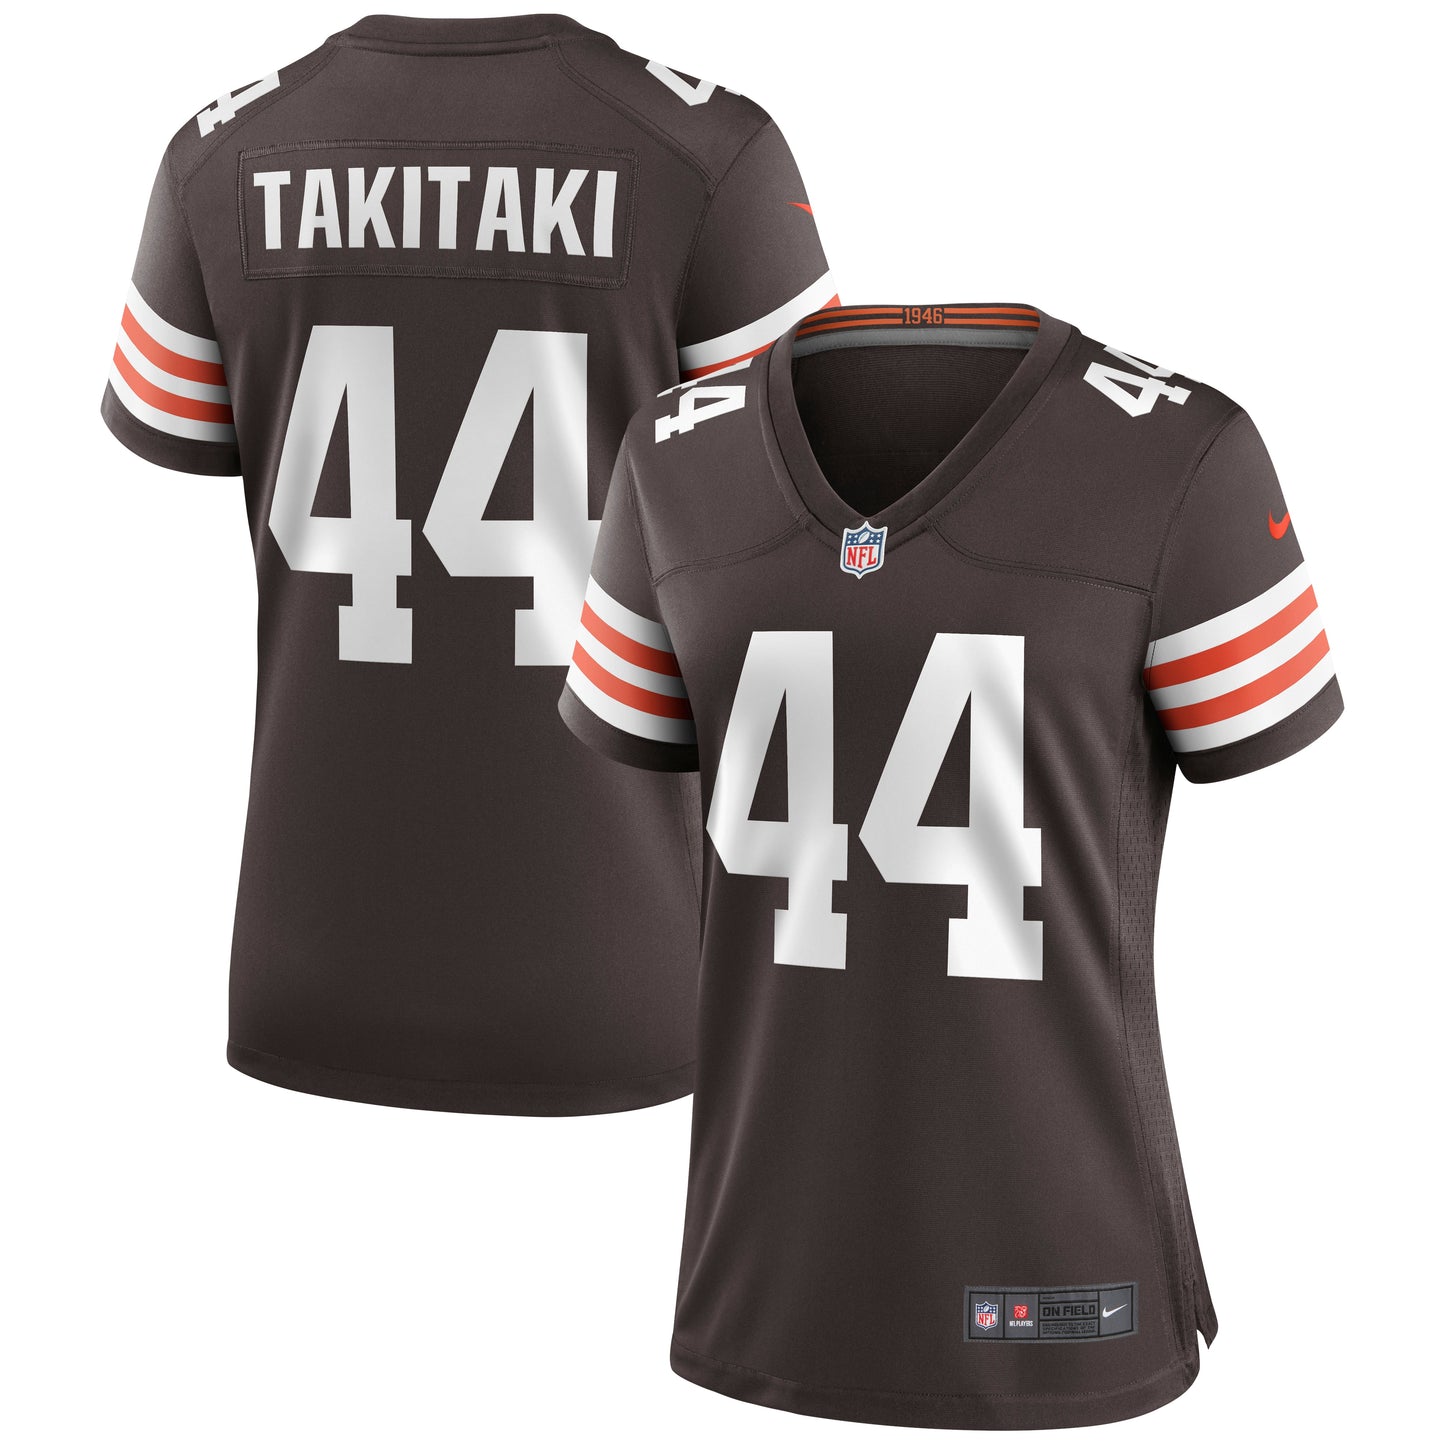 Sione Takitaki Cleveland Browns Nike Women's Game Jersey - Brown